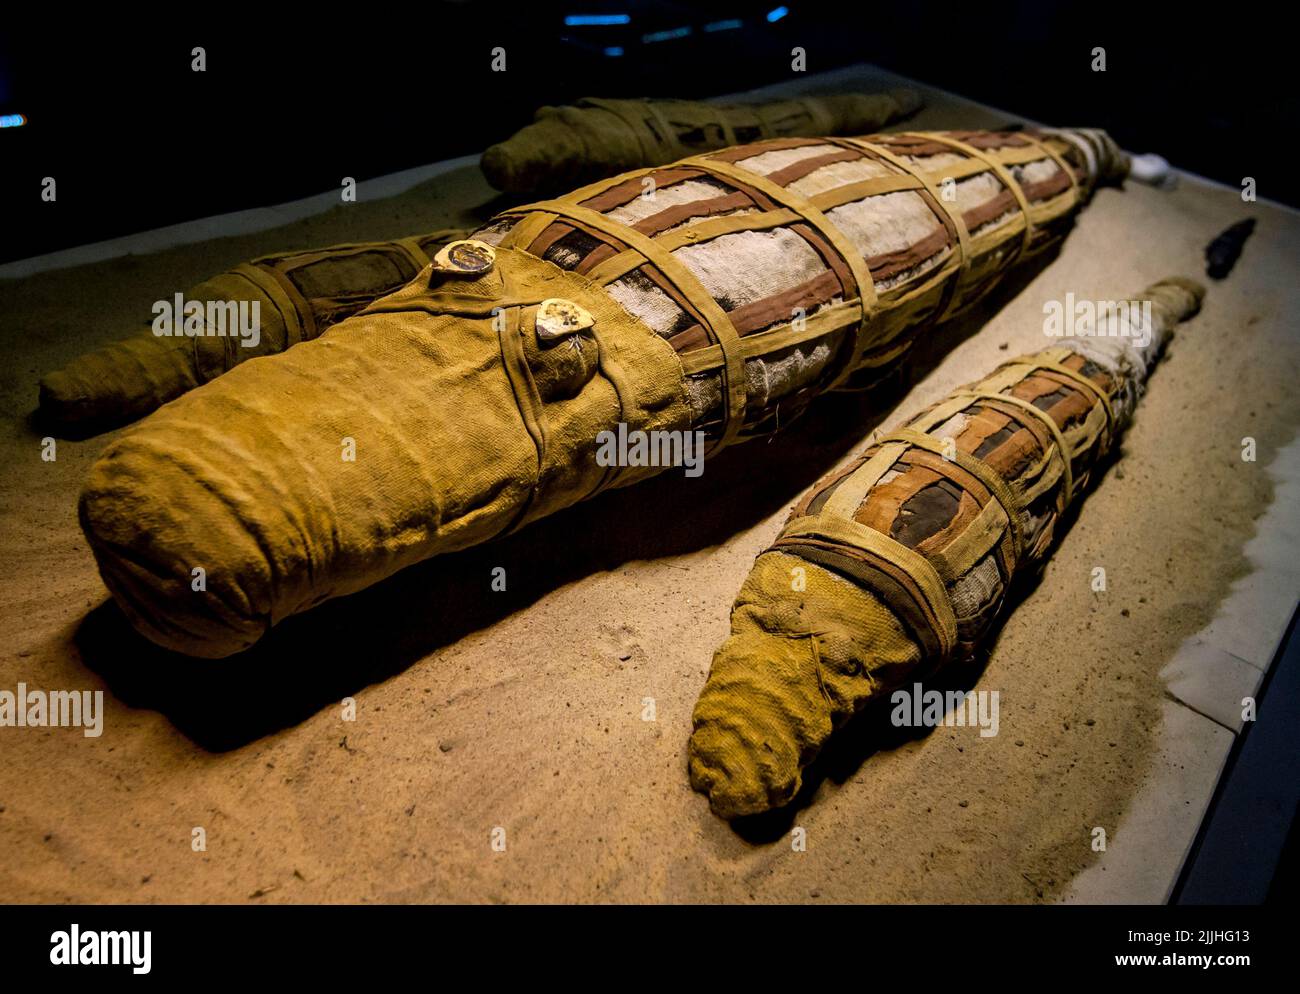 Ancient mummified crocodiles wrapped in cloth located within the Crocodile Museum at the ancient site of Kom Ombo in central Egypt. Stock Photo